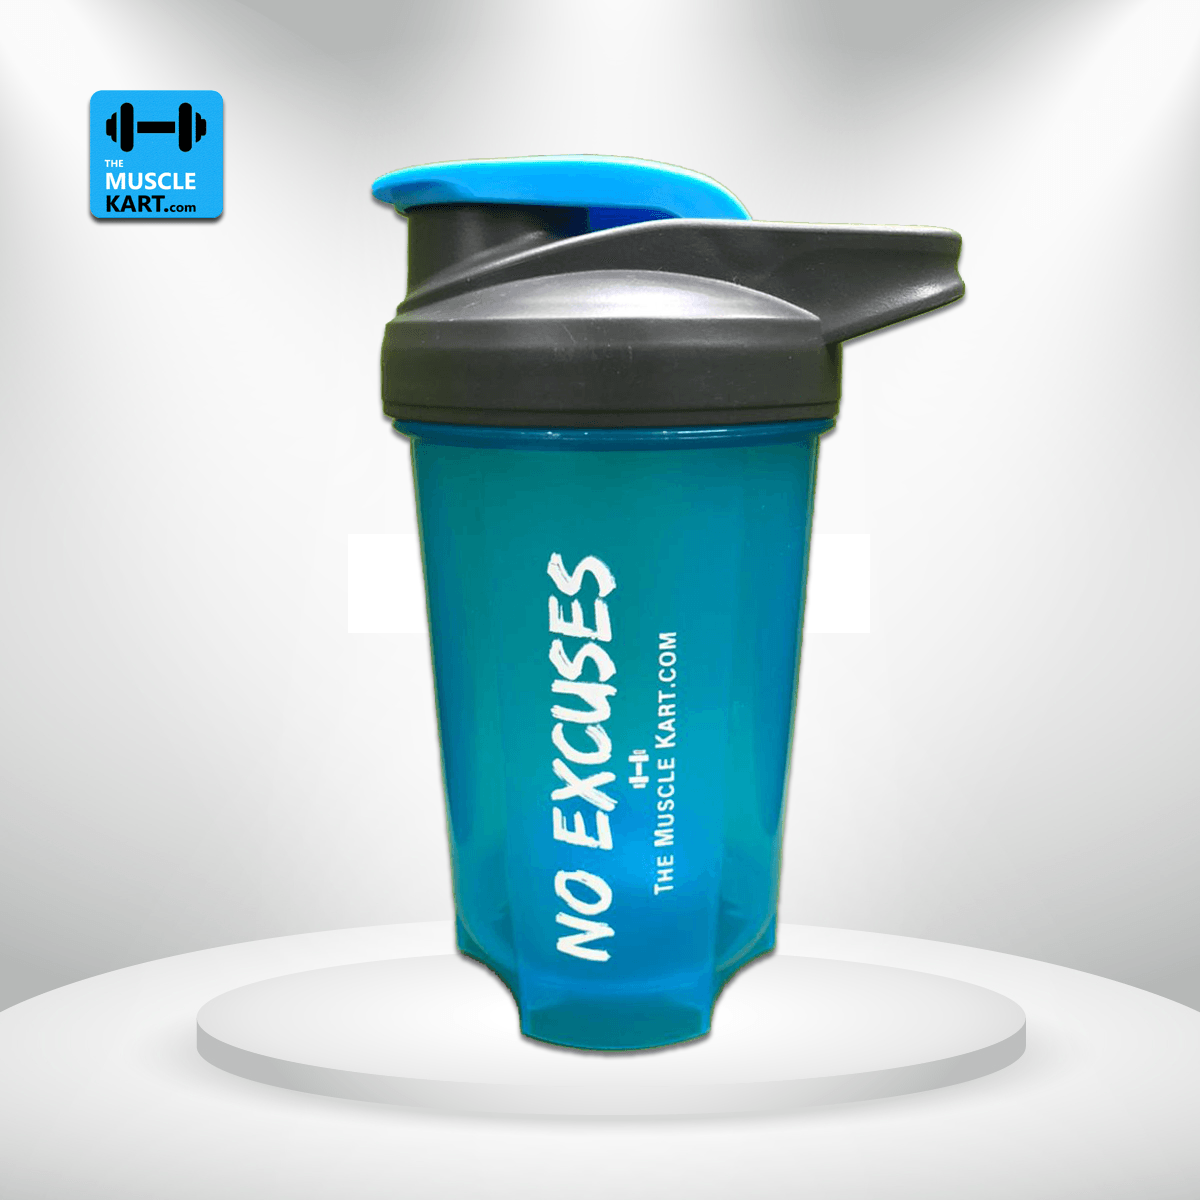 No Excuses Blue Protein / Gym Shaker 600ml - The Muscle Kart.com